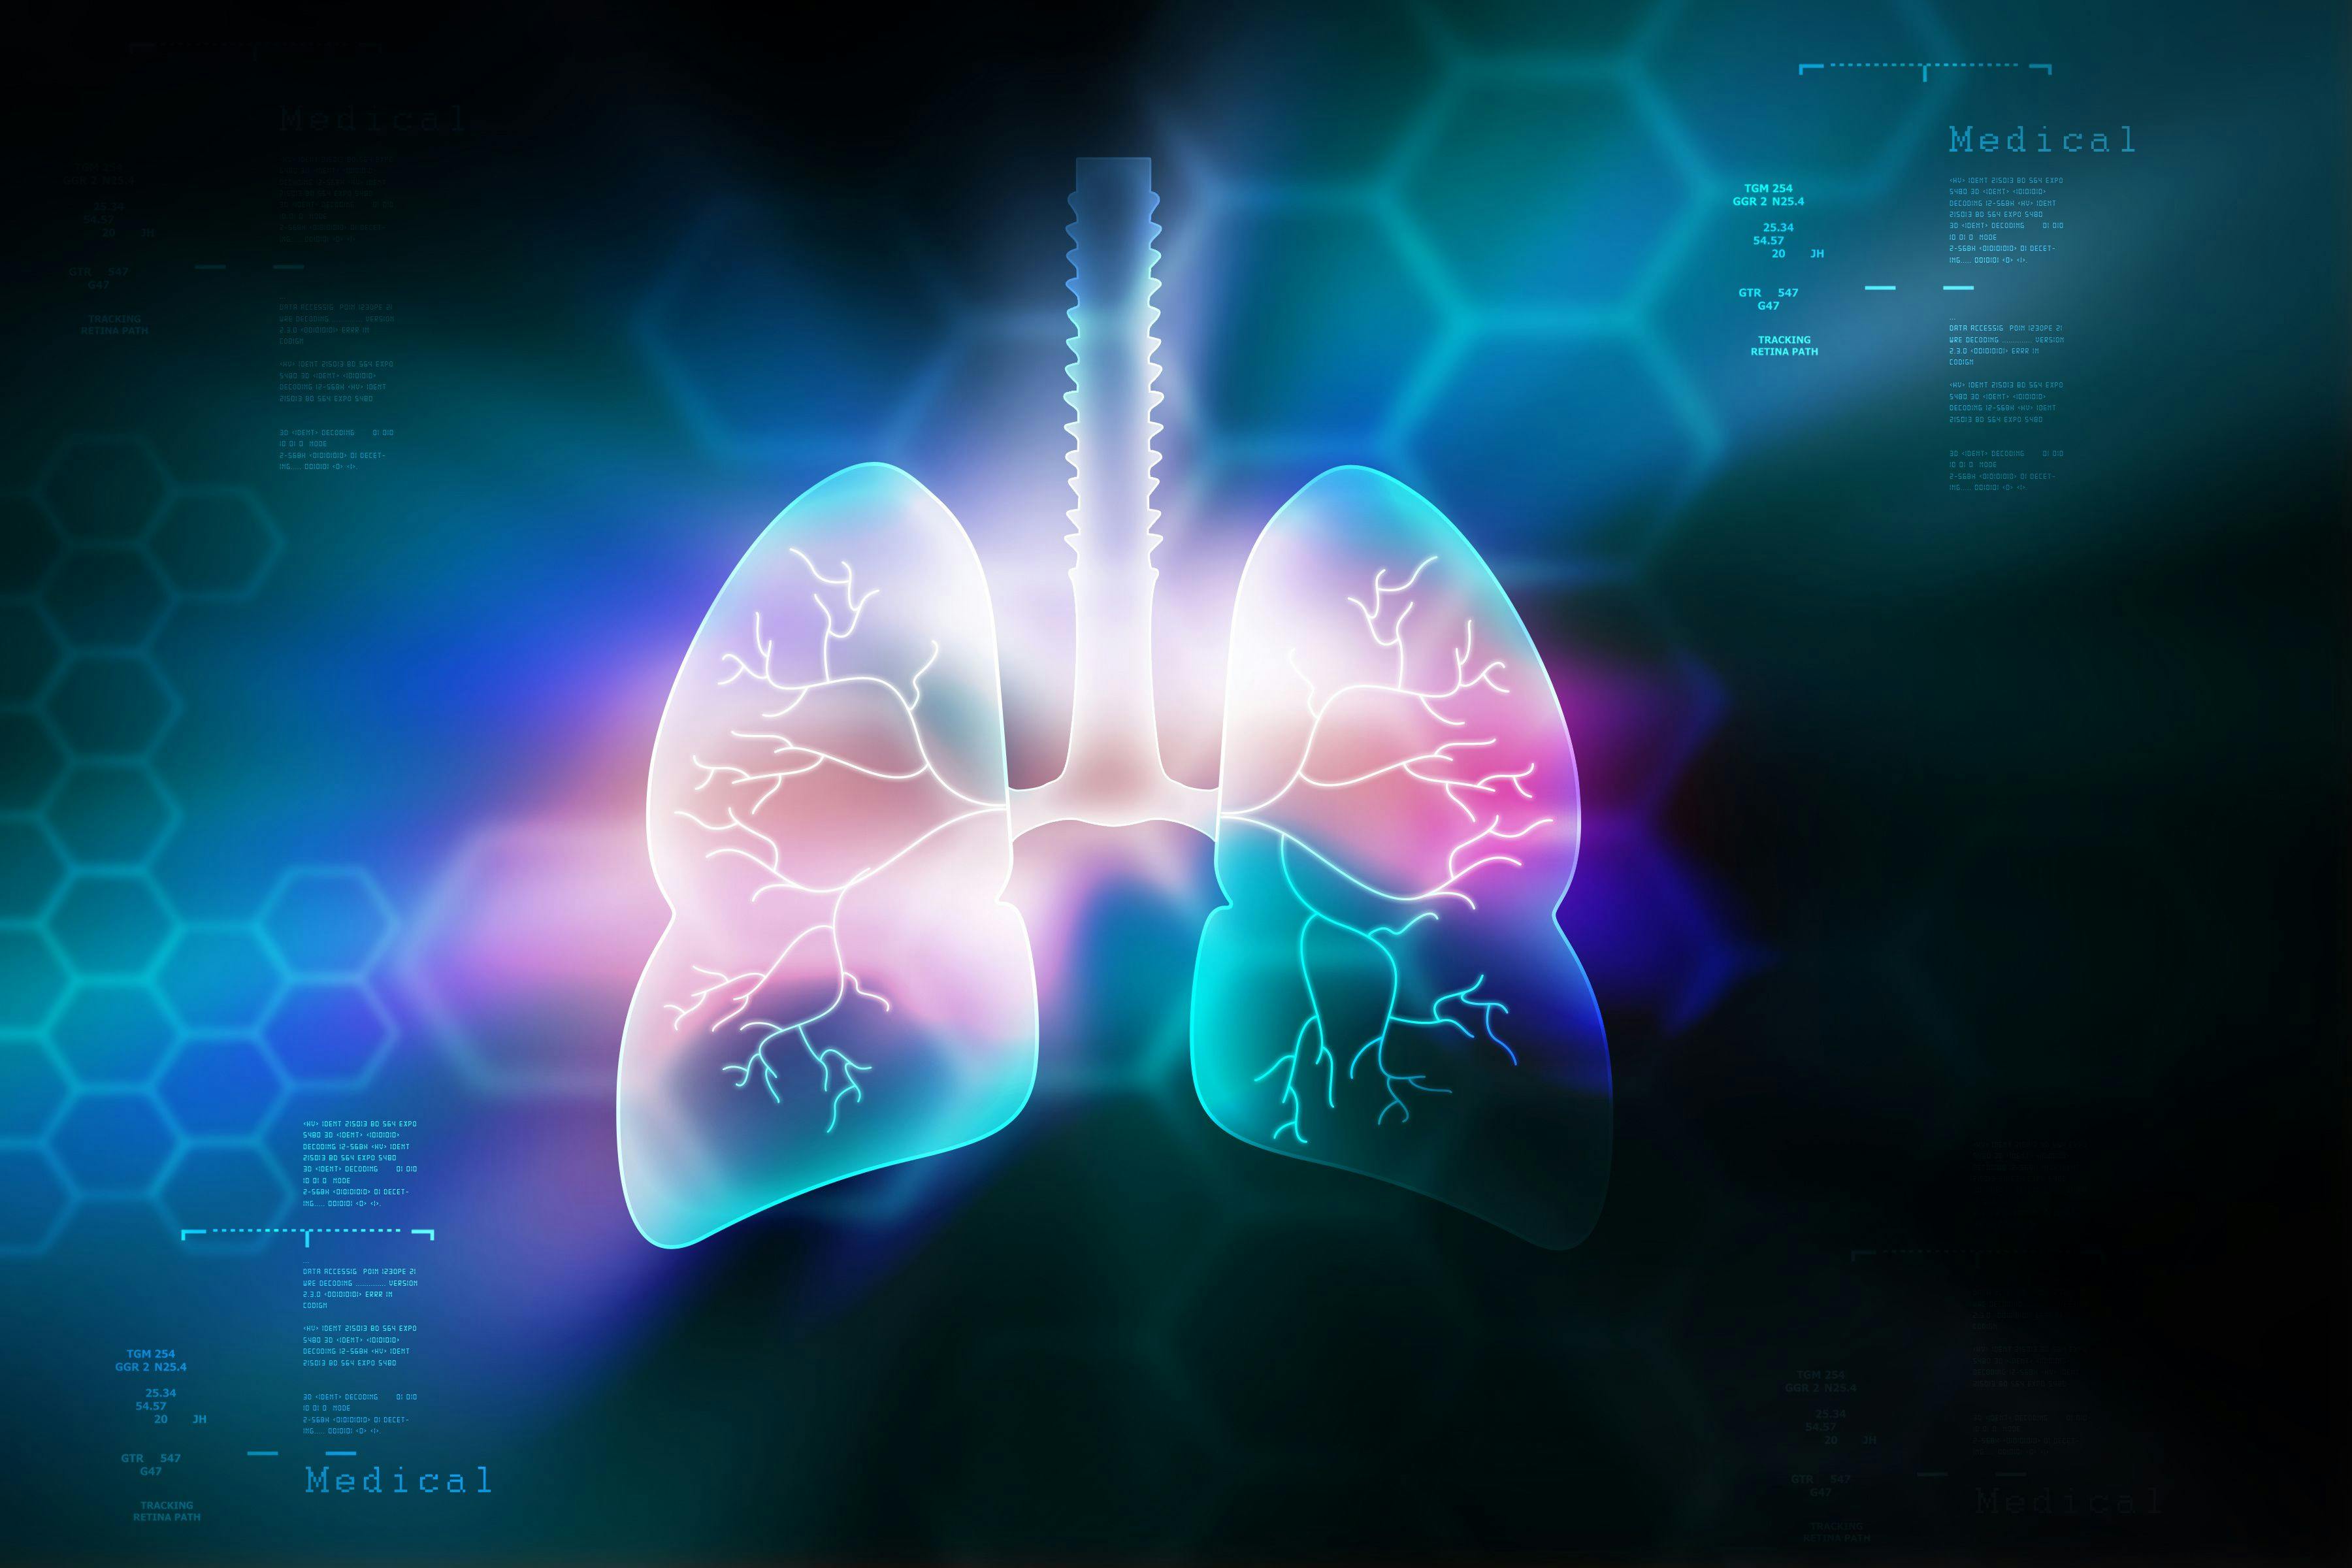 Pulmonary Hypertension Common in Patients With COPD Referred for Catheterization, Study Finds